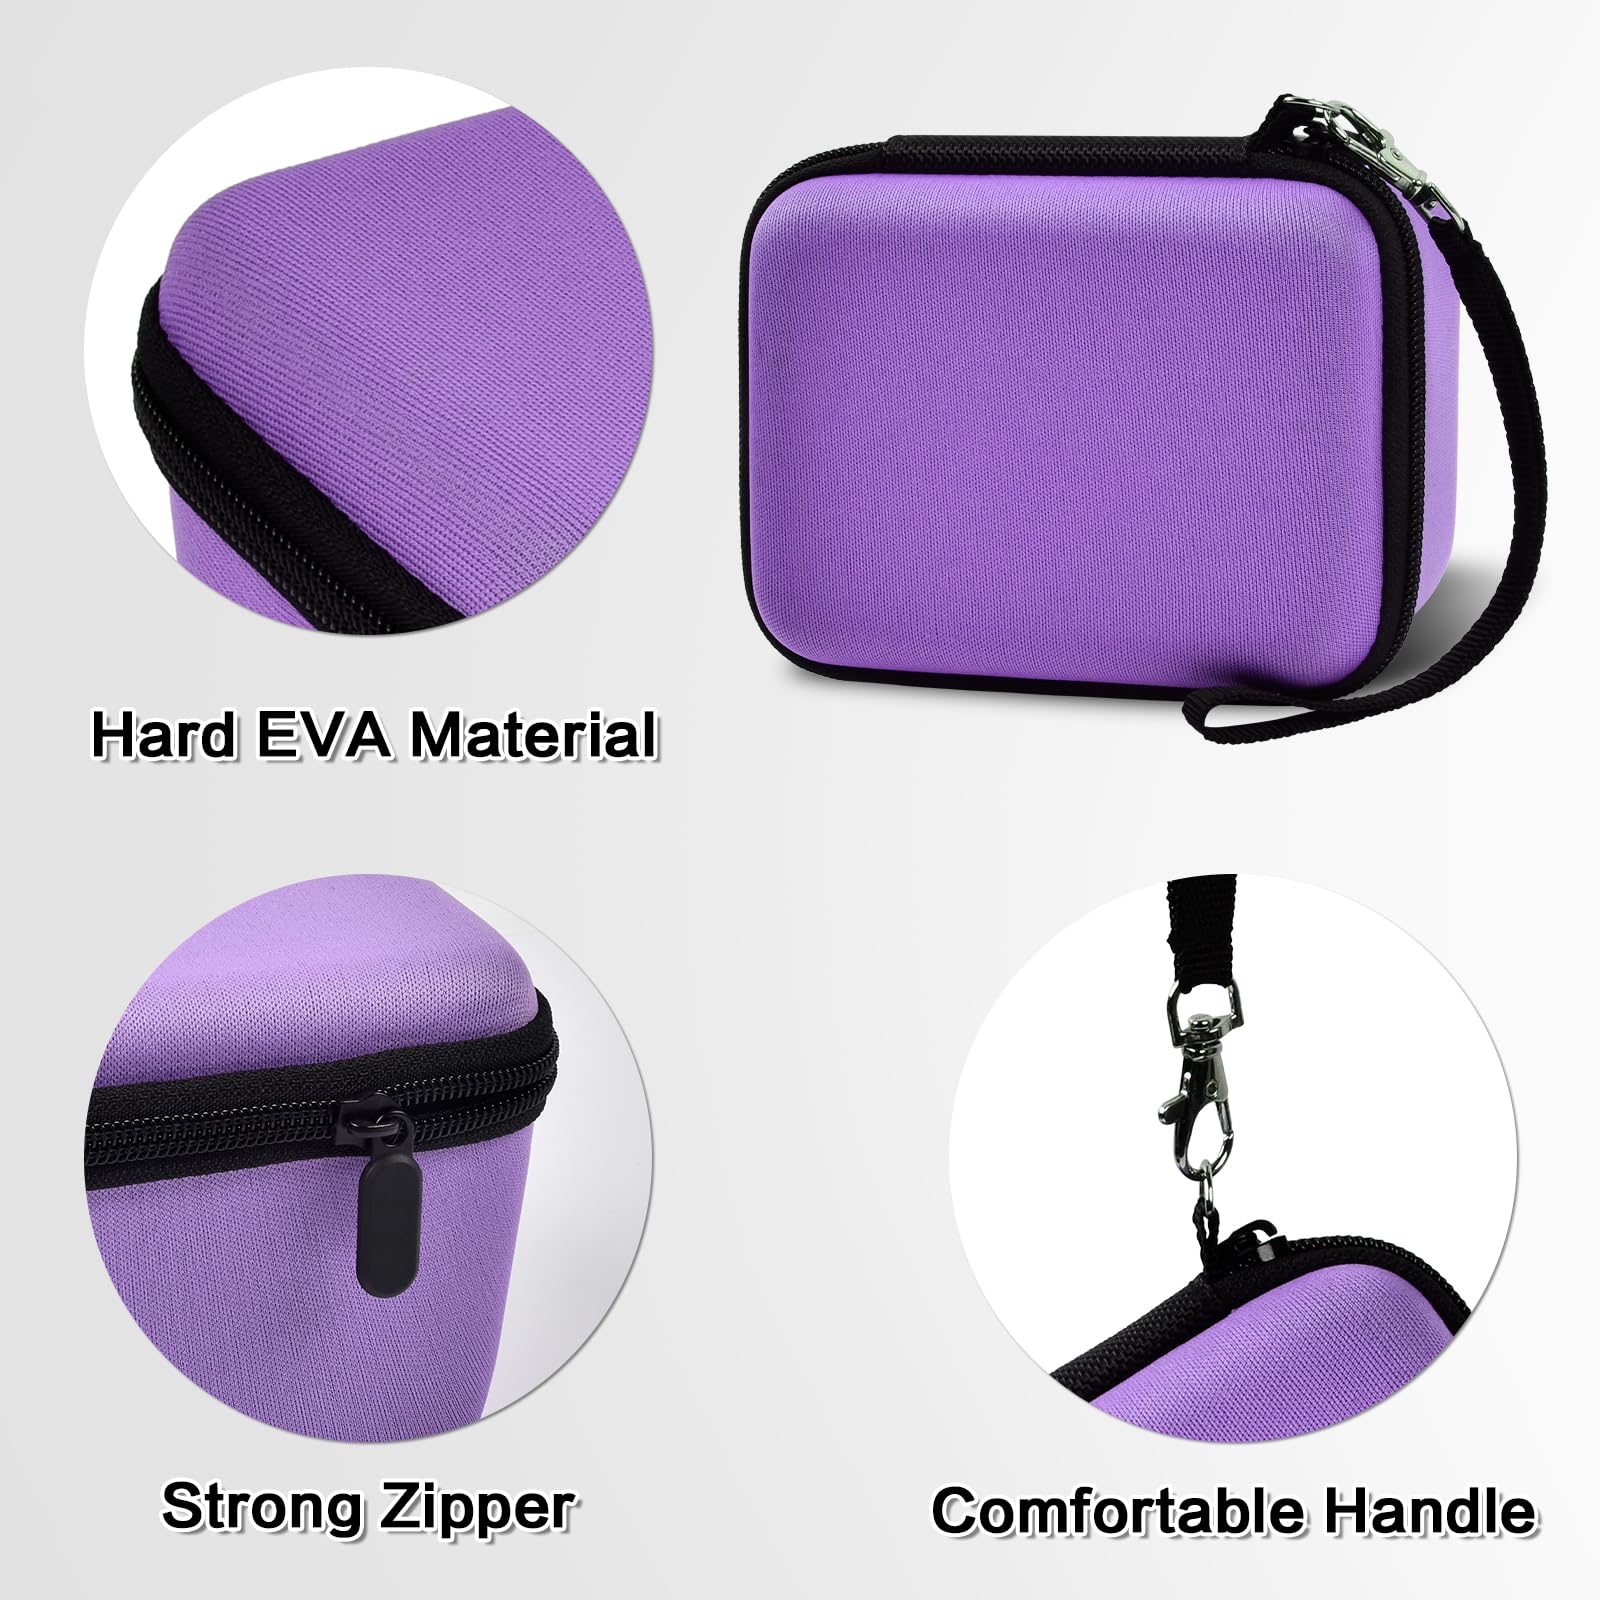 Vlogging Camera Case Compatible with brewene/for Femivo/for KVUTCIEIN/for Duluvulu 4K 48MP Digital Cameras for Youtube. Vlog Camera Carrying Storage for Lens, Cable and Other Accessories - Purple